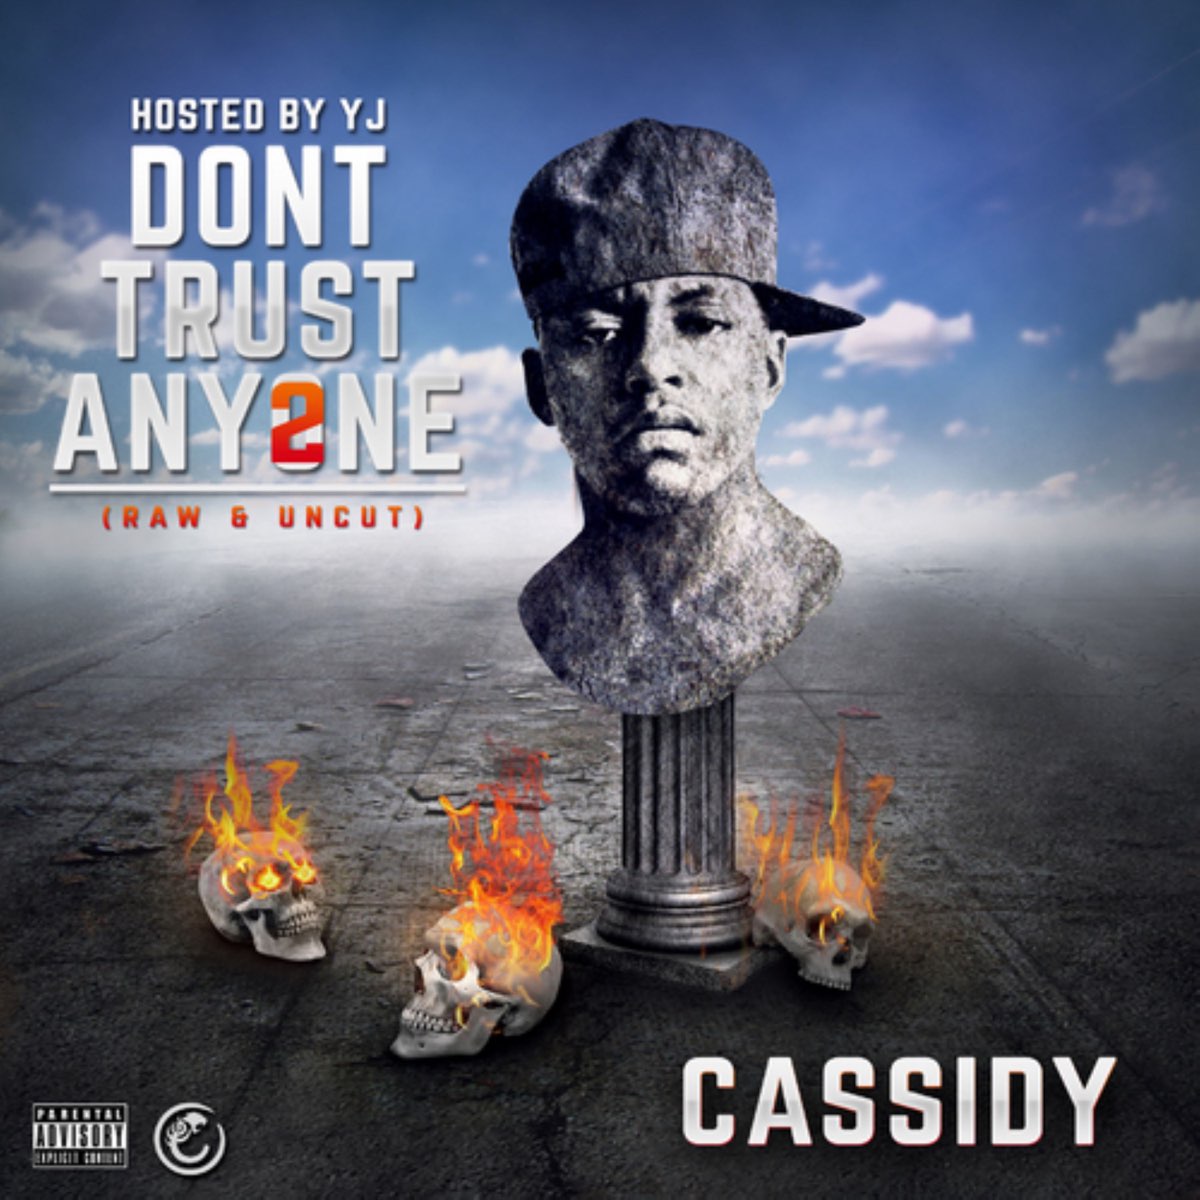 Don't Trust Anyone 2 by Cassidy on Apple Music